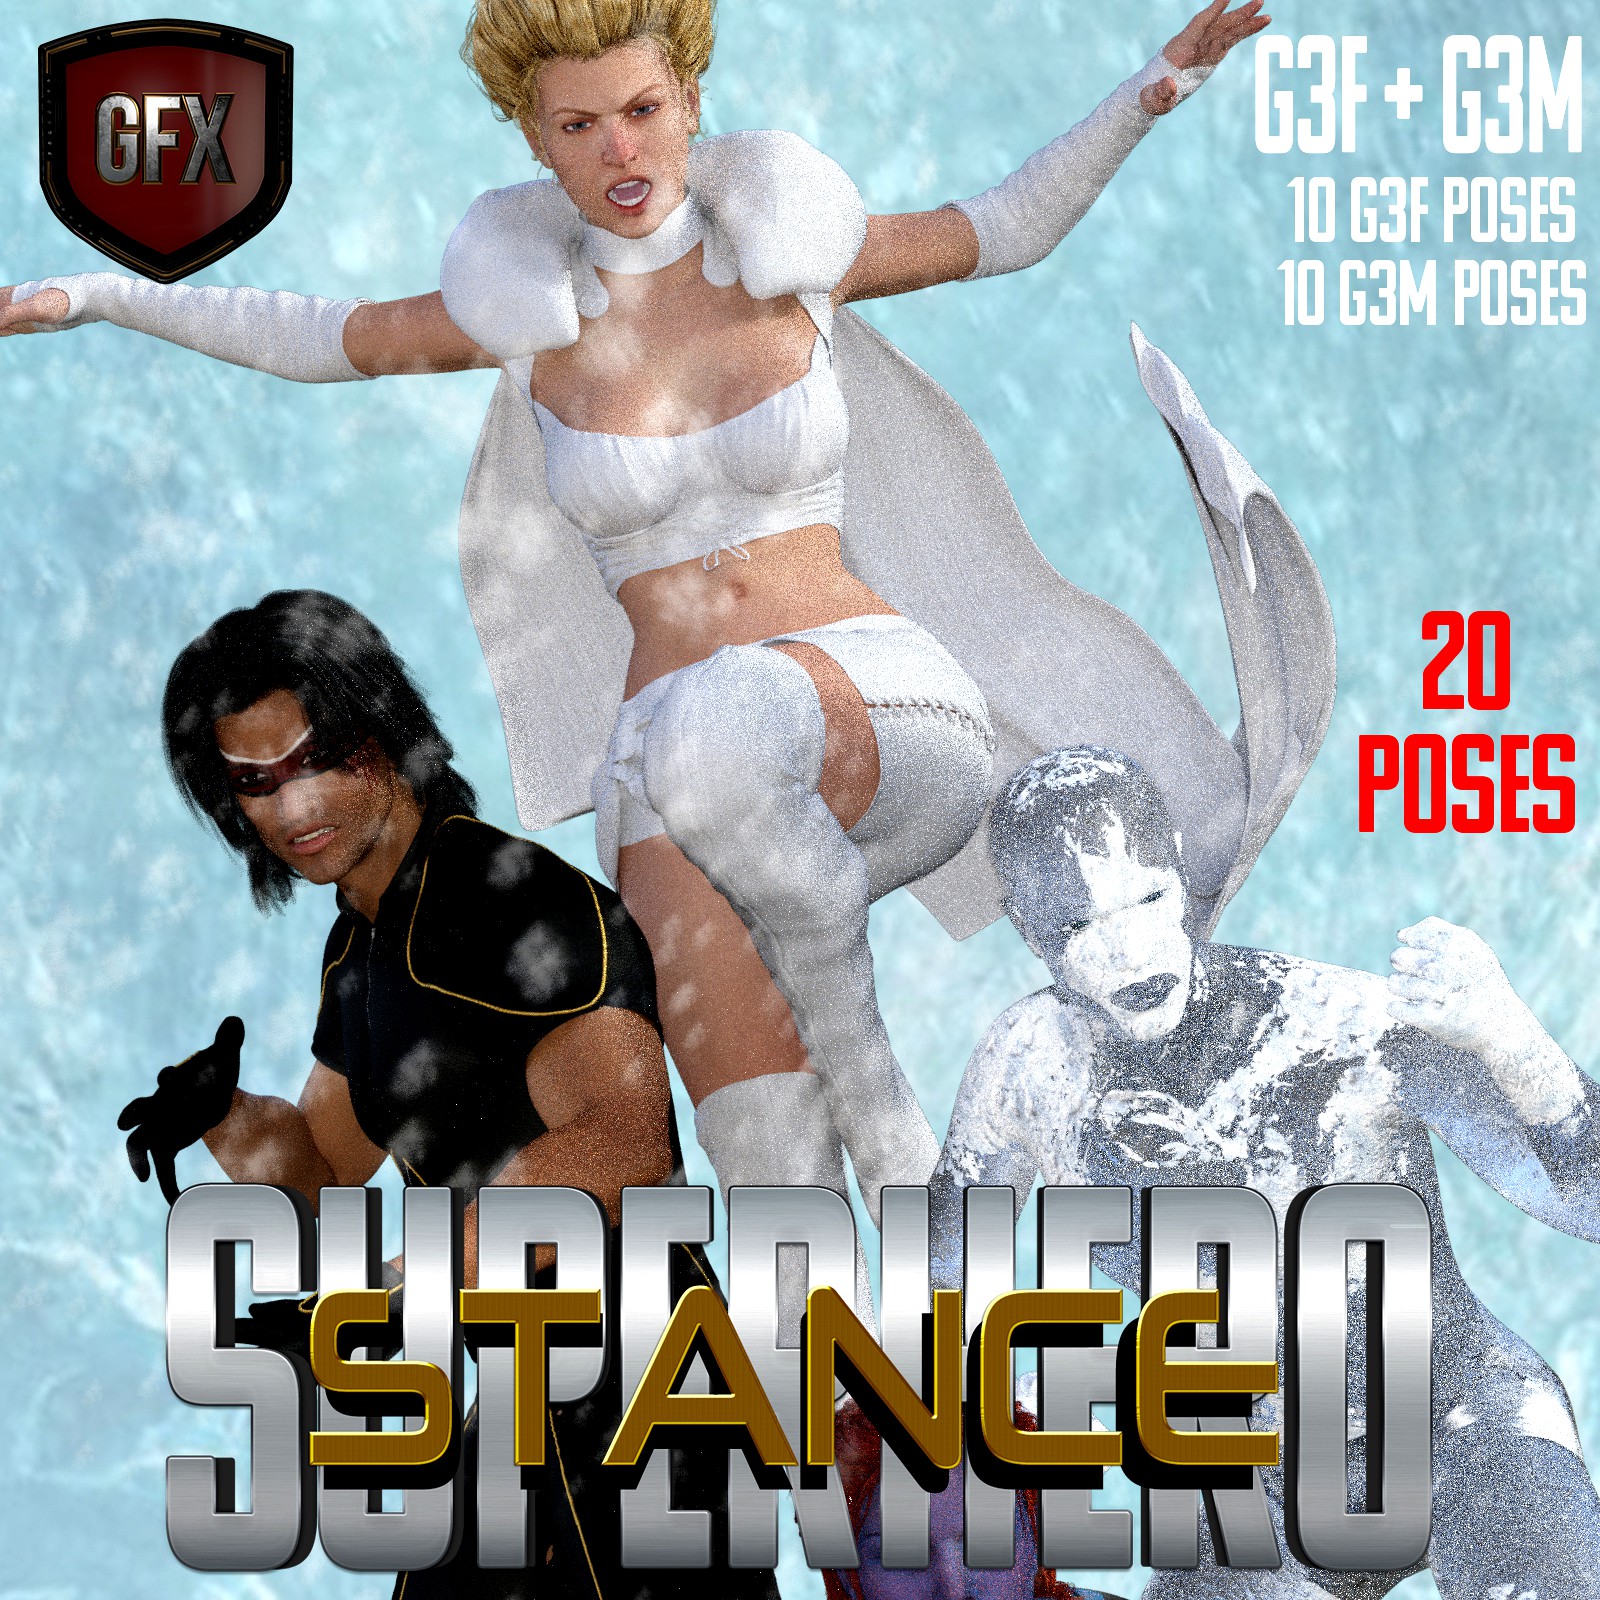 SuperHero Stance for G3F and G3M Volume 1